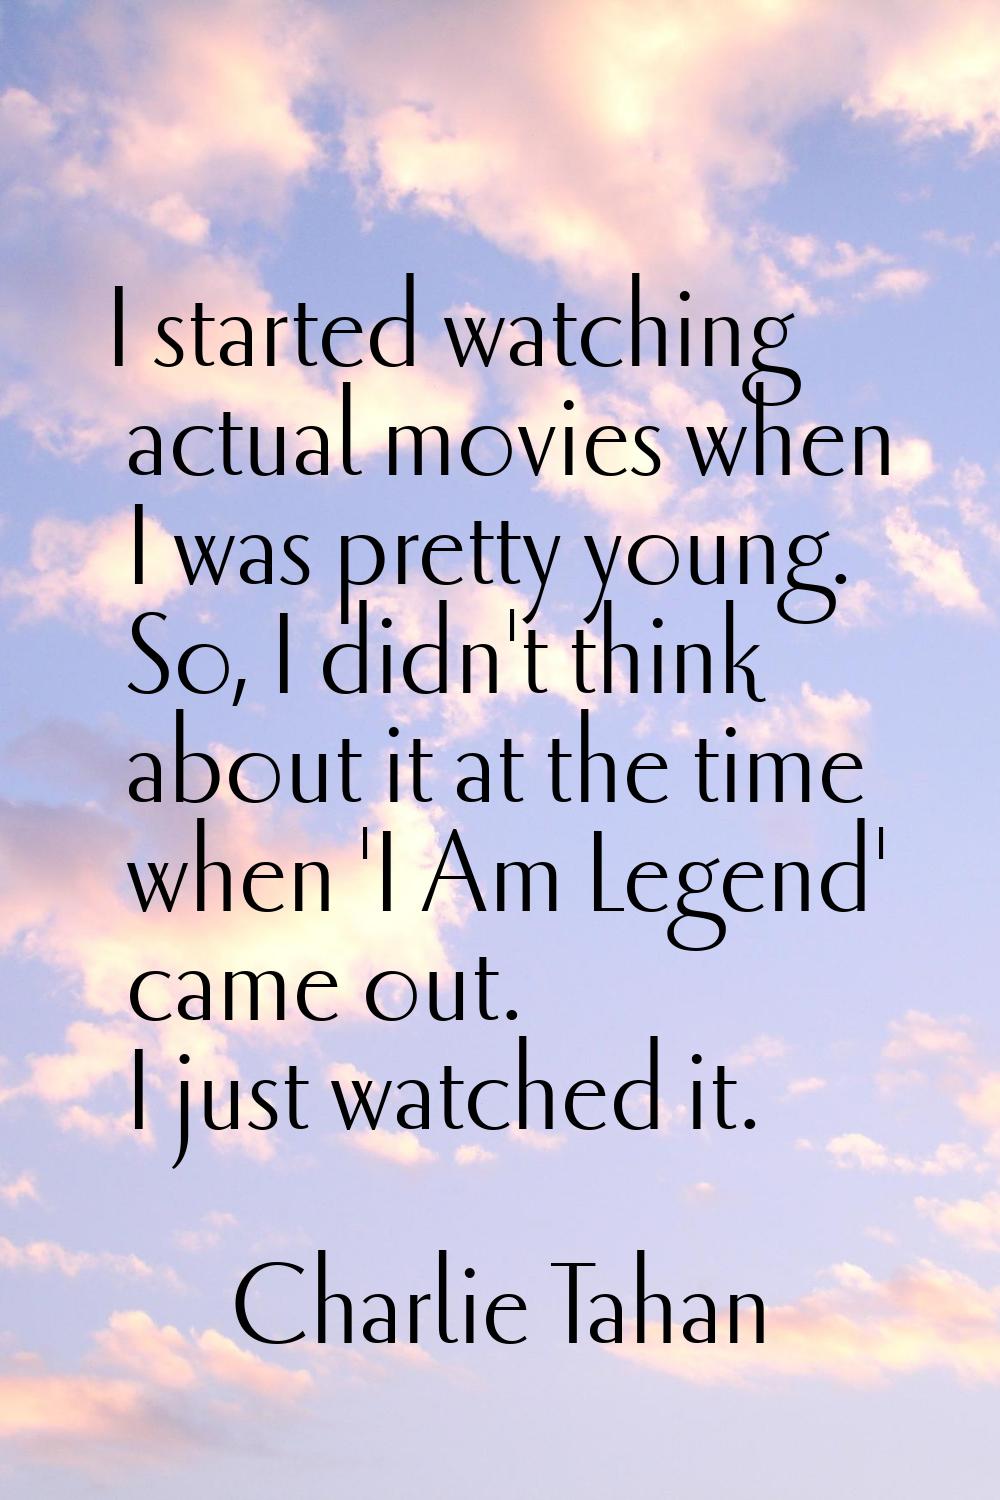 I started watching actual movies when I was pretty young. So, I didn't think about it at the time w